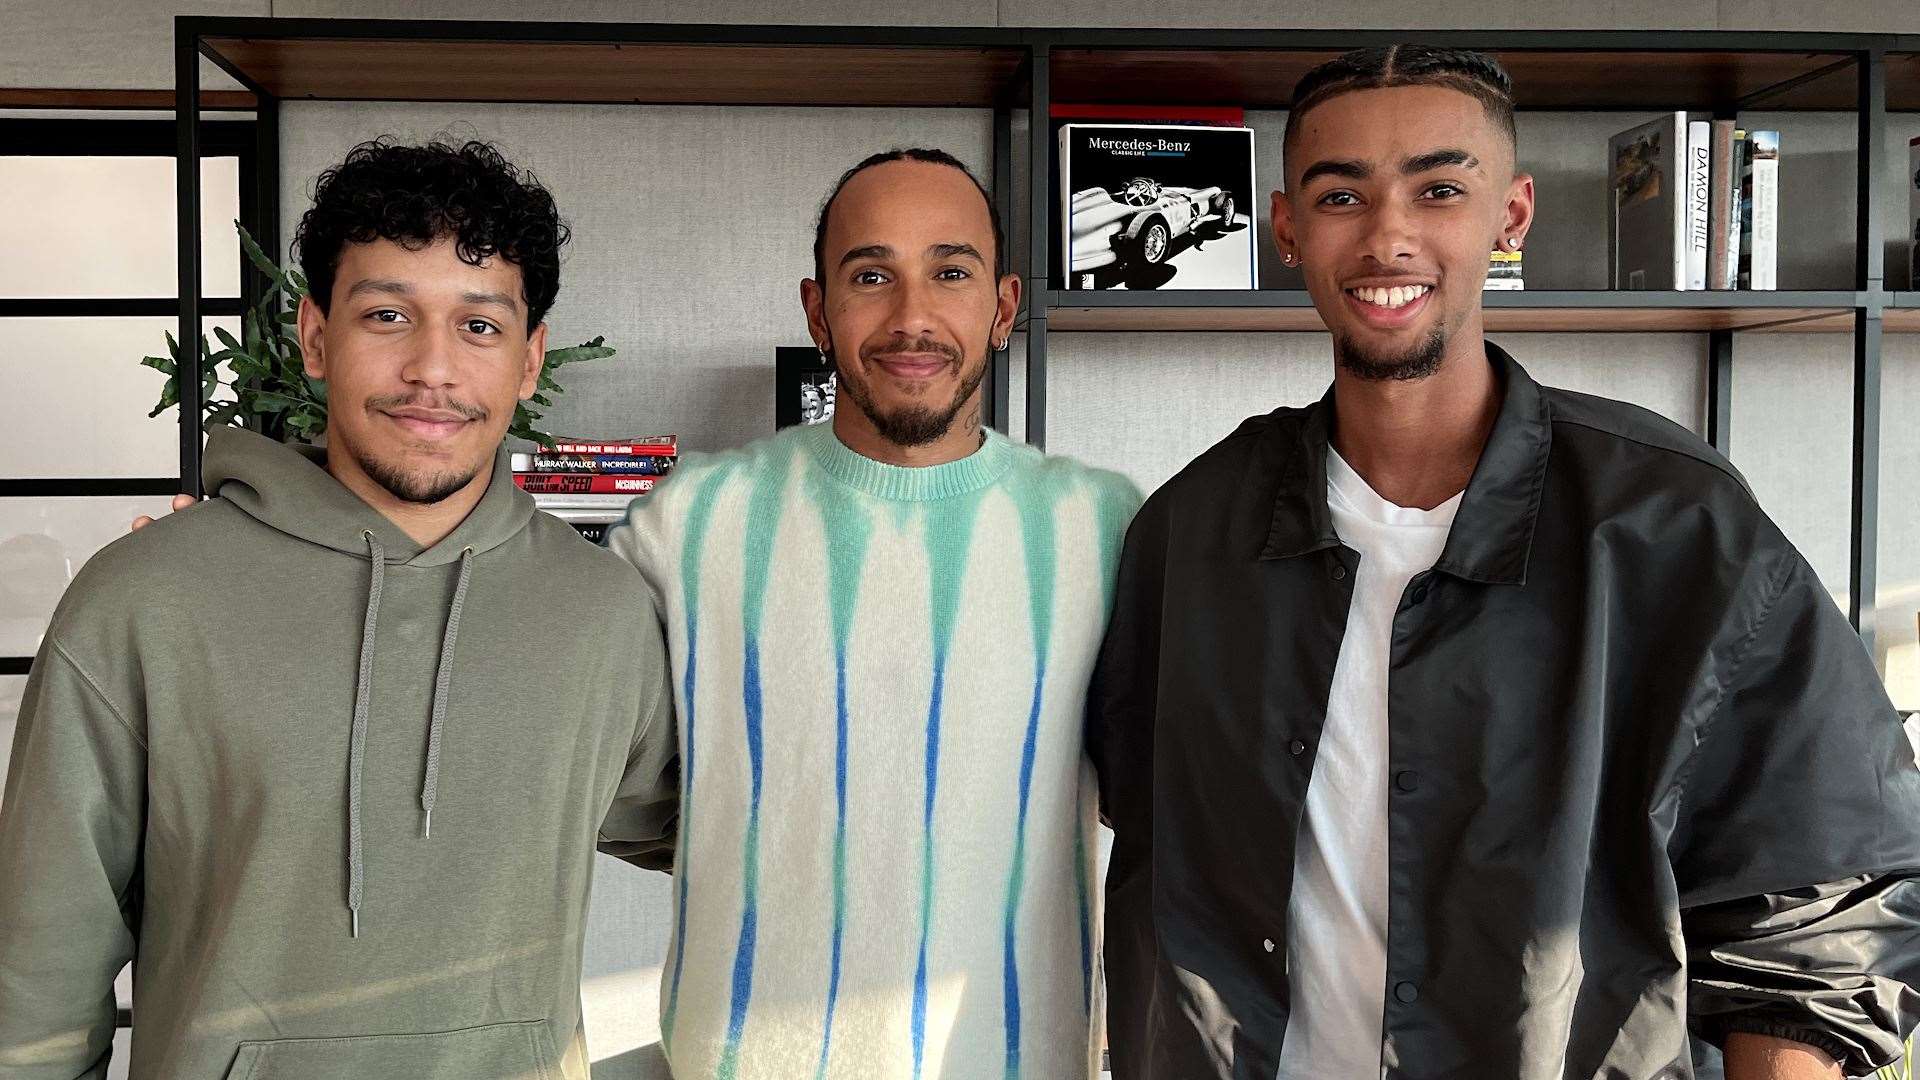 Ruben Stanislaus, 18, left, from Strood, will appear in a BBC documentary alongside Formula One icon Lewis Hamilton. Picture: BBC